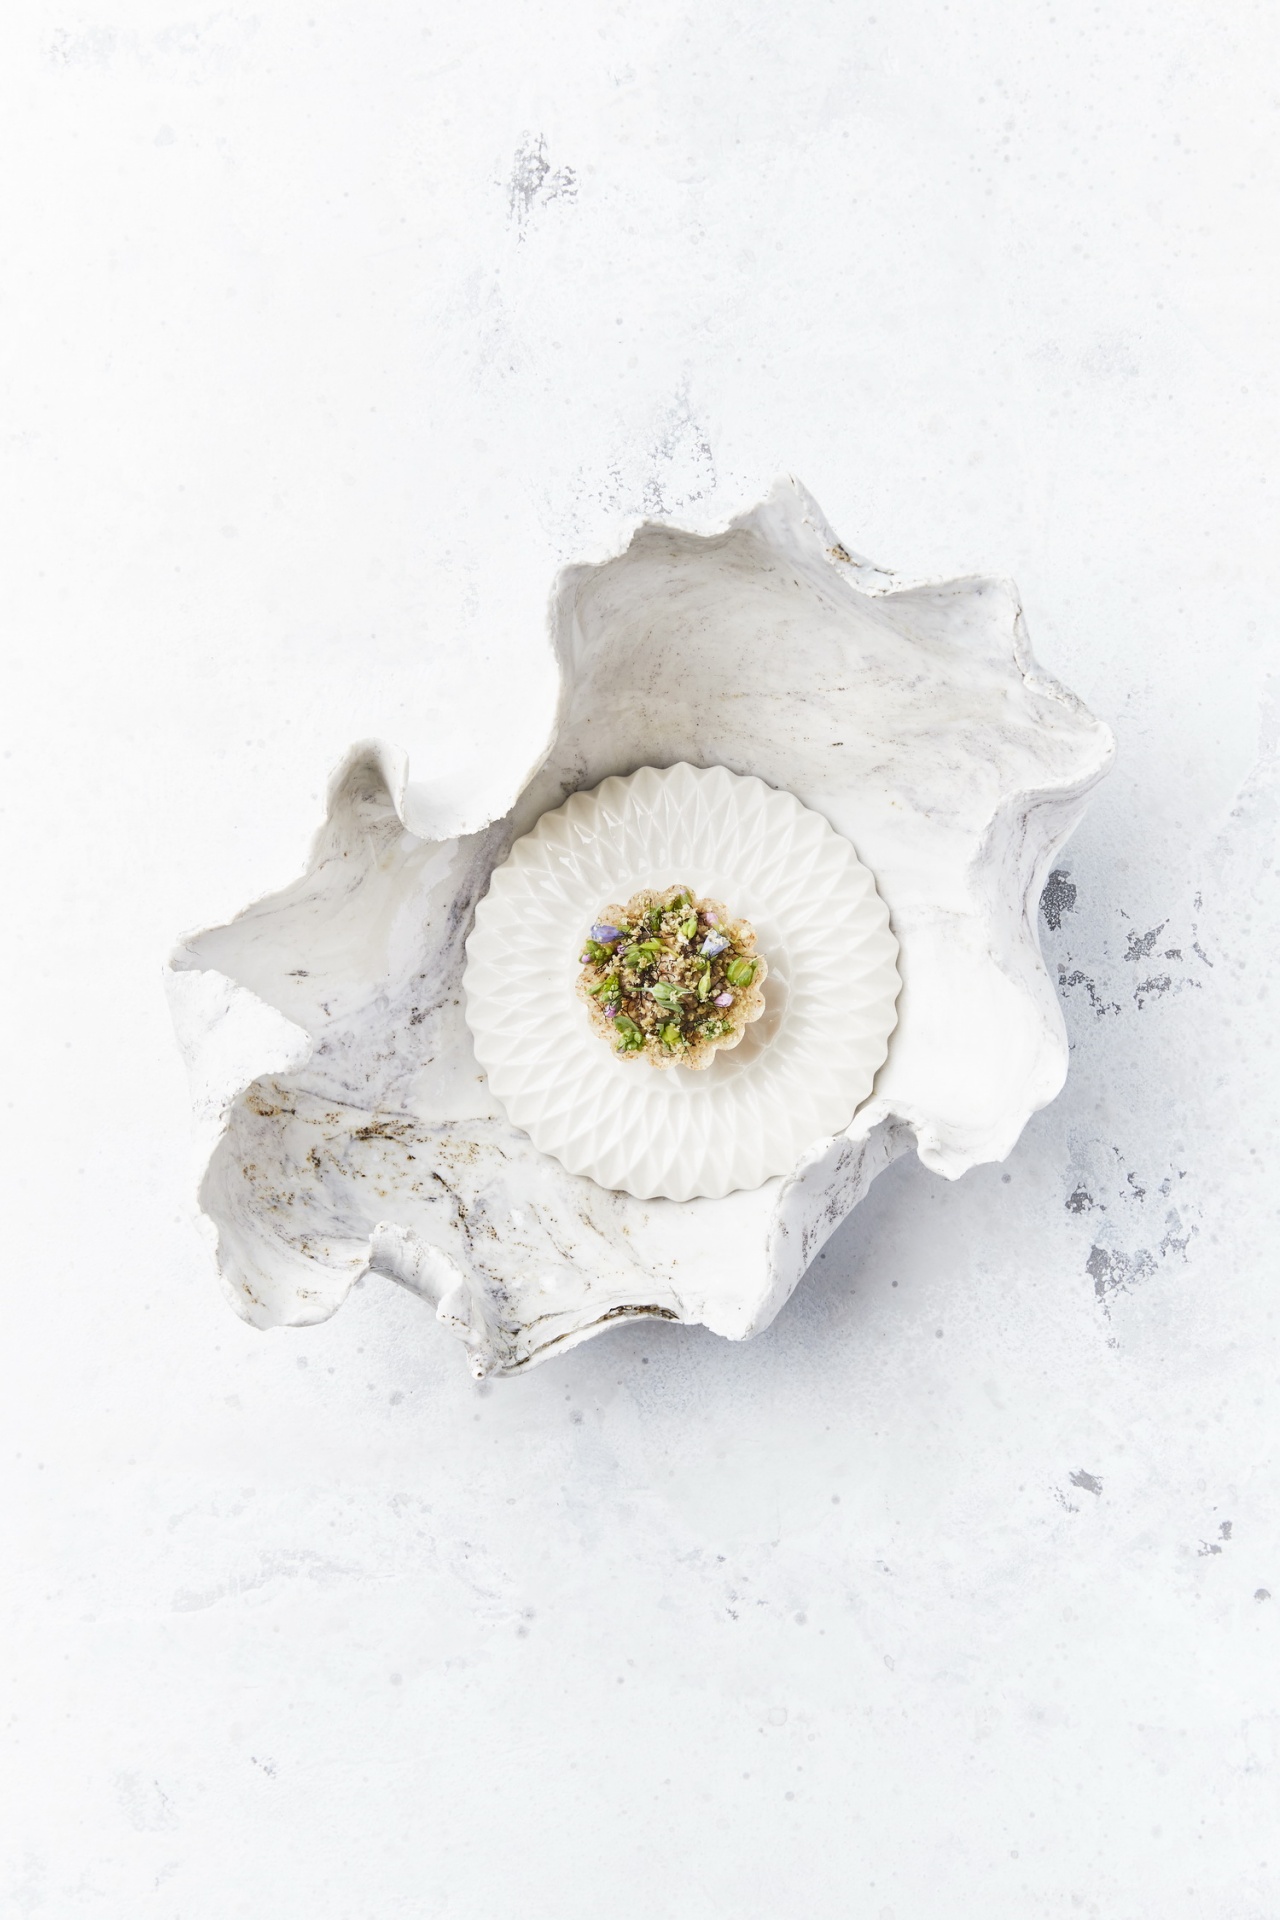 Geranium - Oyster _Tartlets_ with Cucumber & Truffle Seaweed - PRINT - Photo Credit - Claes Bech-Poulsen.jpg